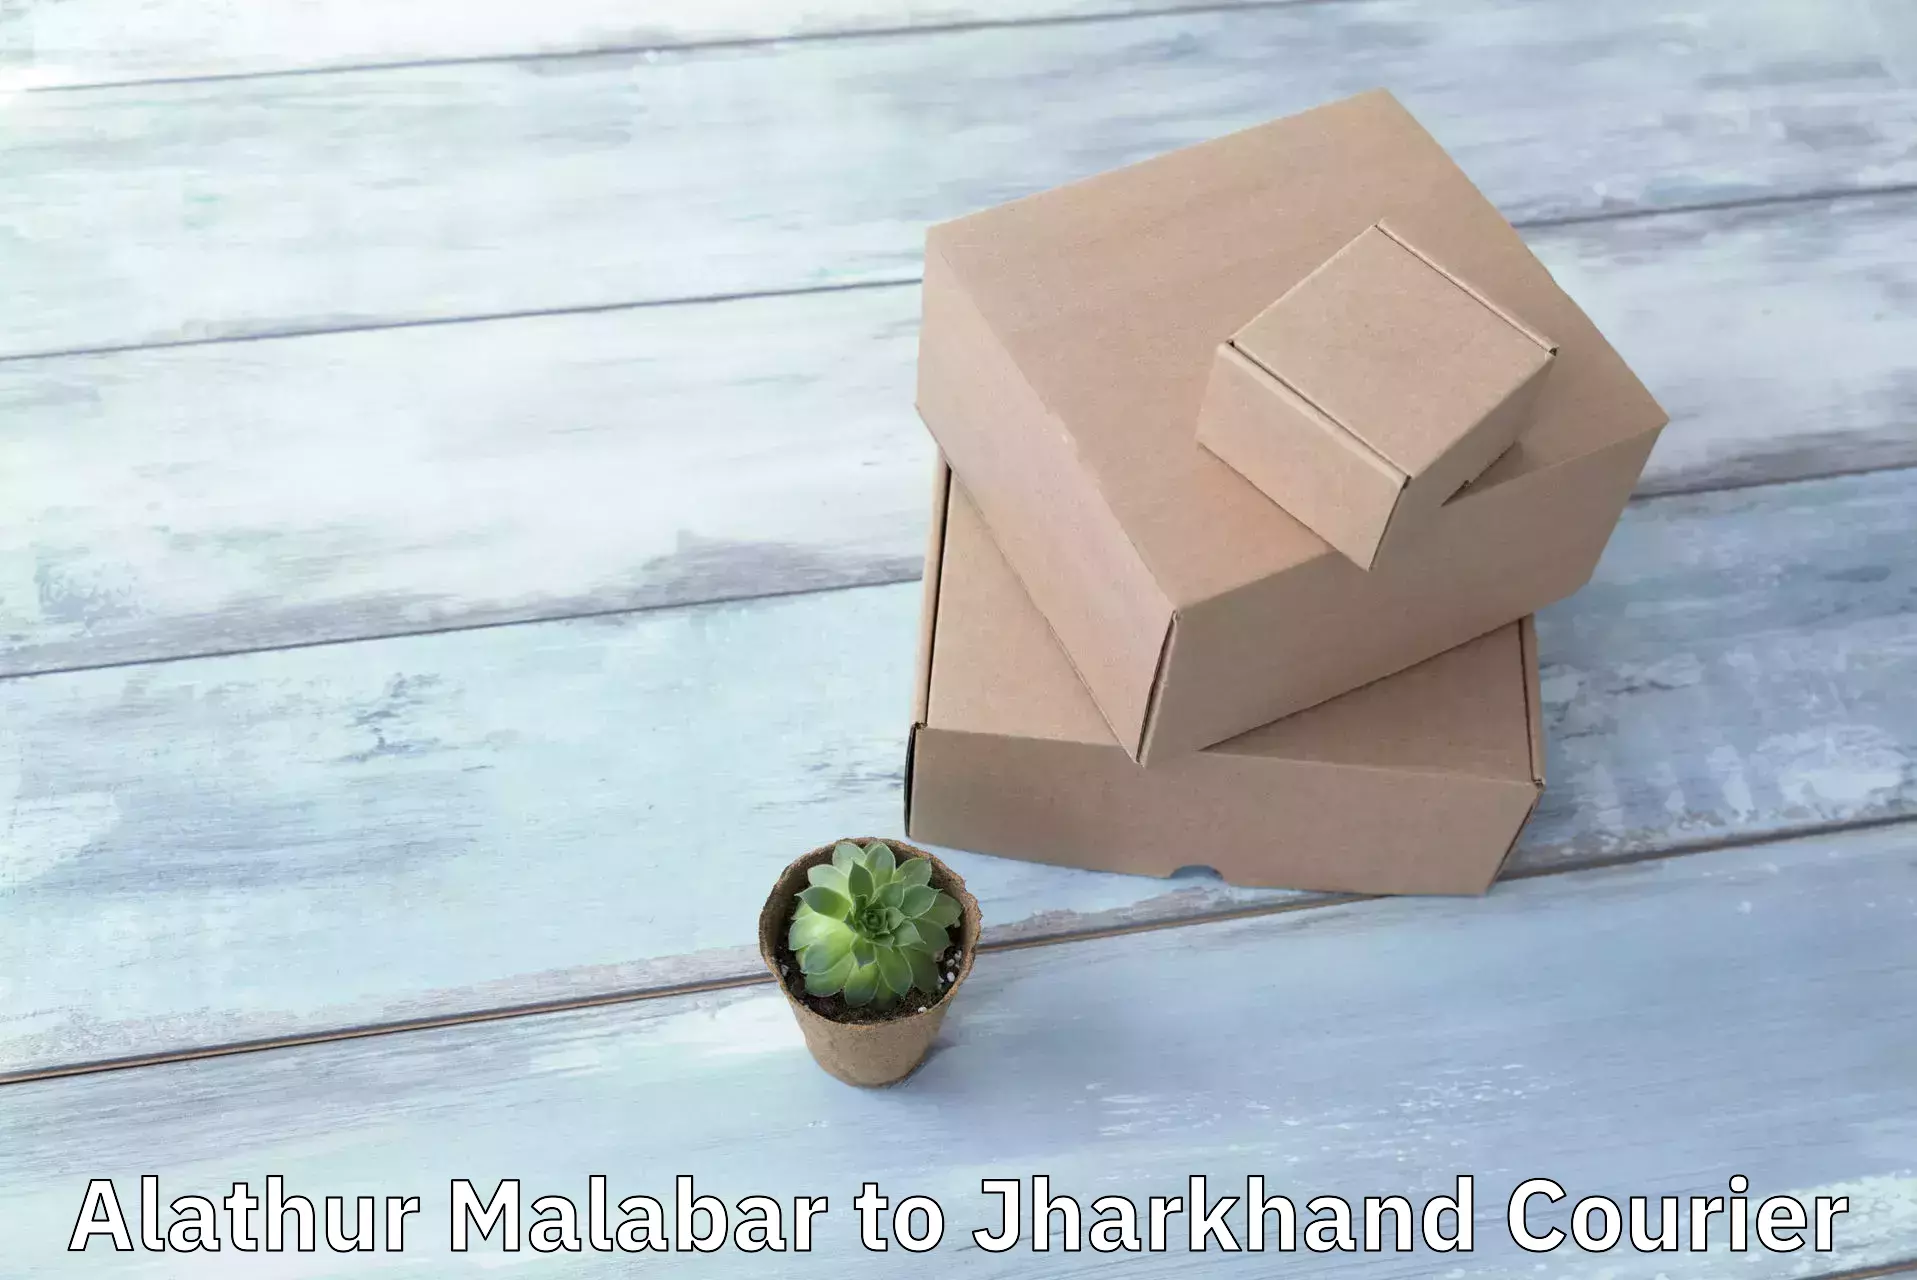 Personalized courier experiences Alathur Malabar to IIT Dhanbad